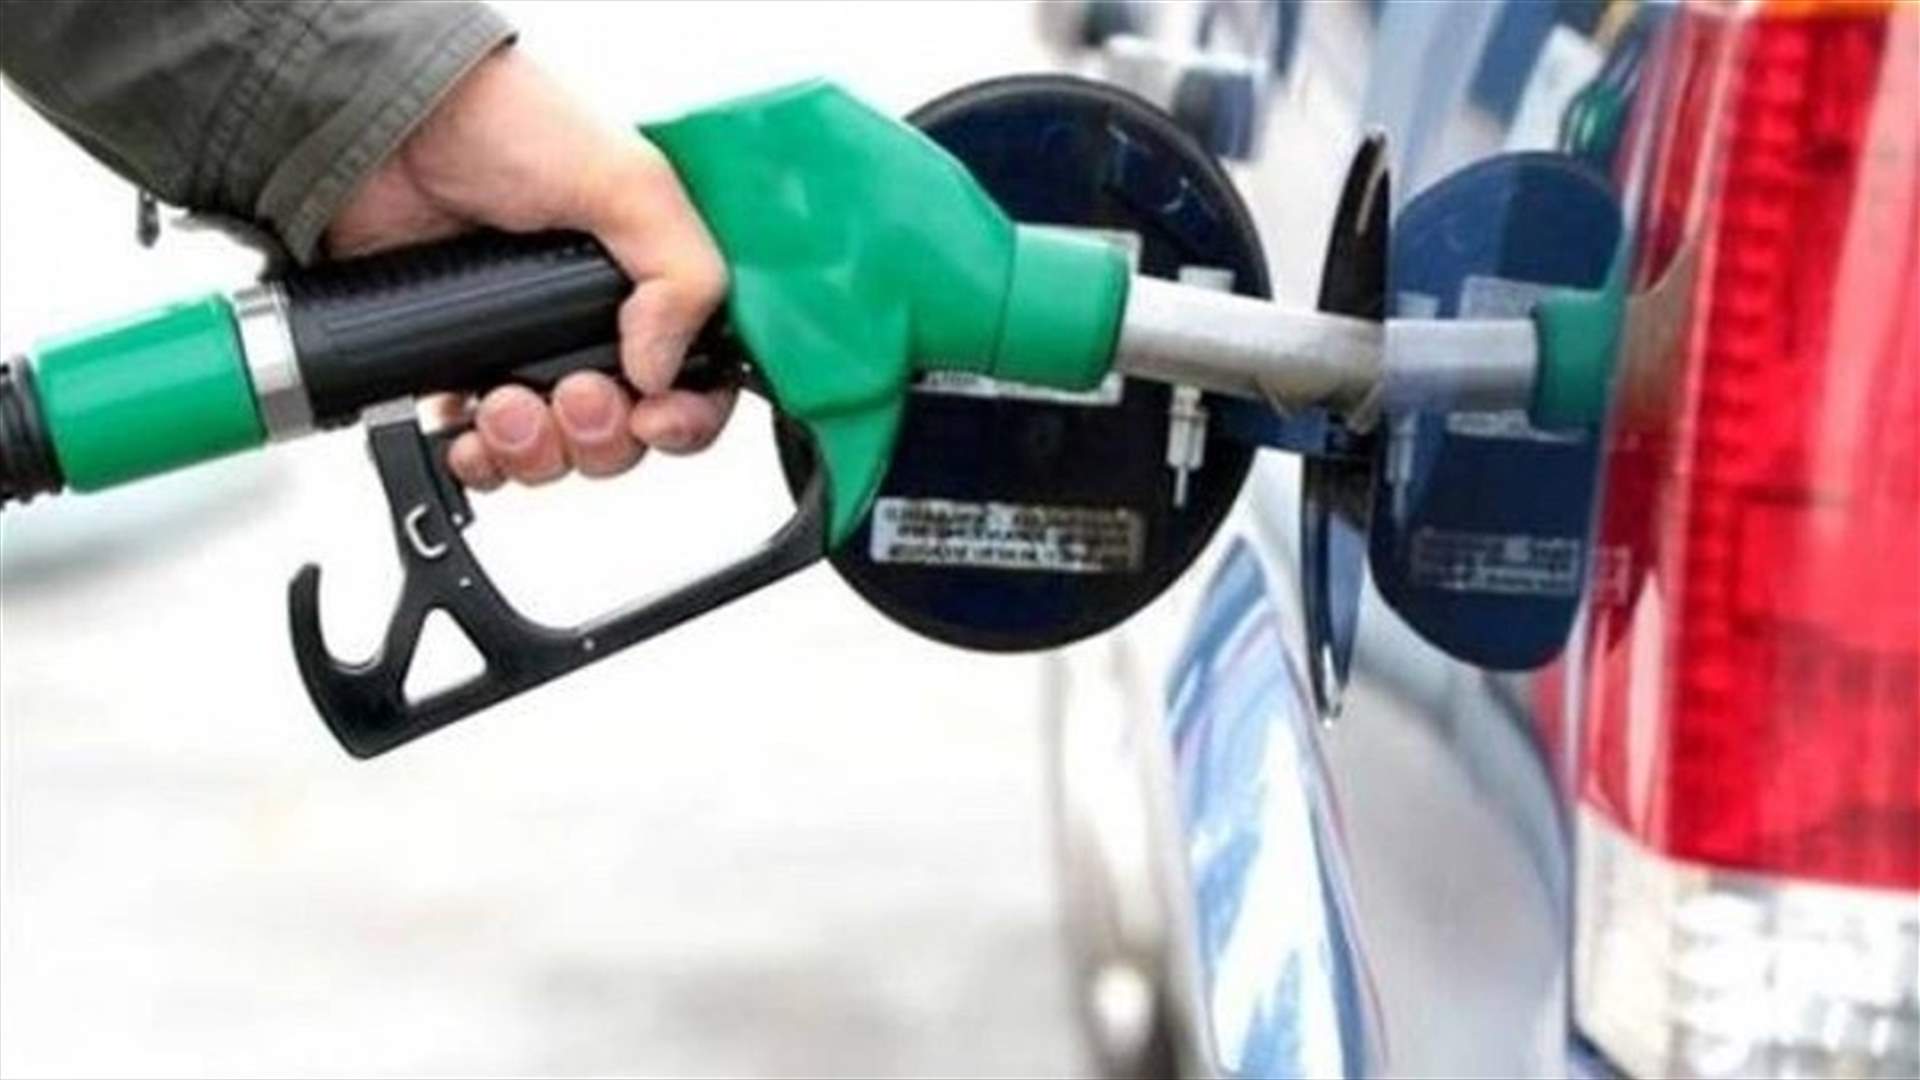 Price of 95 and 98 octane fuel remains unchanged